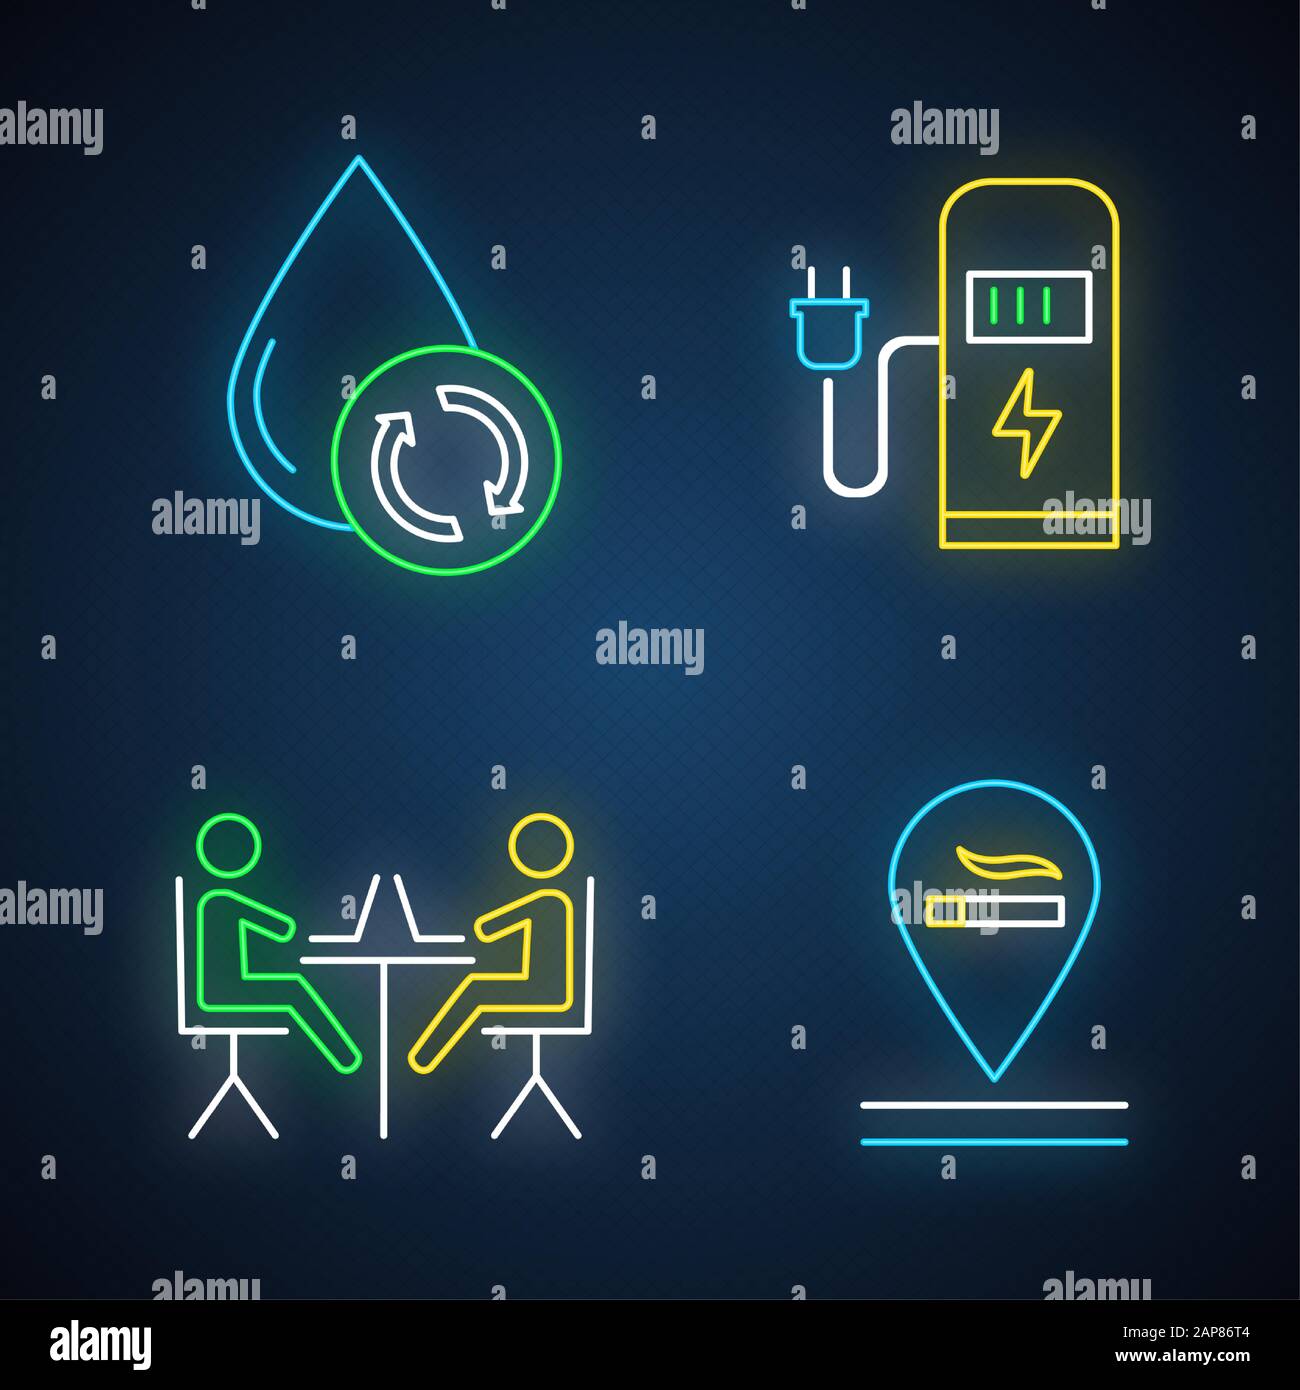 Apartment amenities neon light icons set. Water filtration, car charging station, coworking space, smoking allowed. Comfortable house. Residential ser Stock Vector